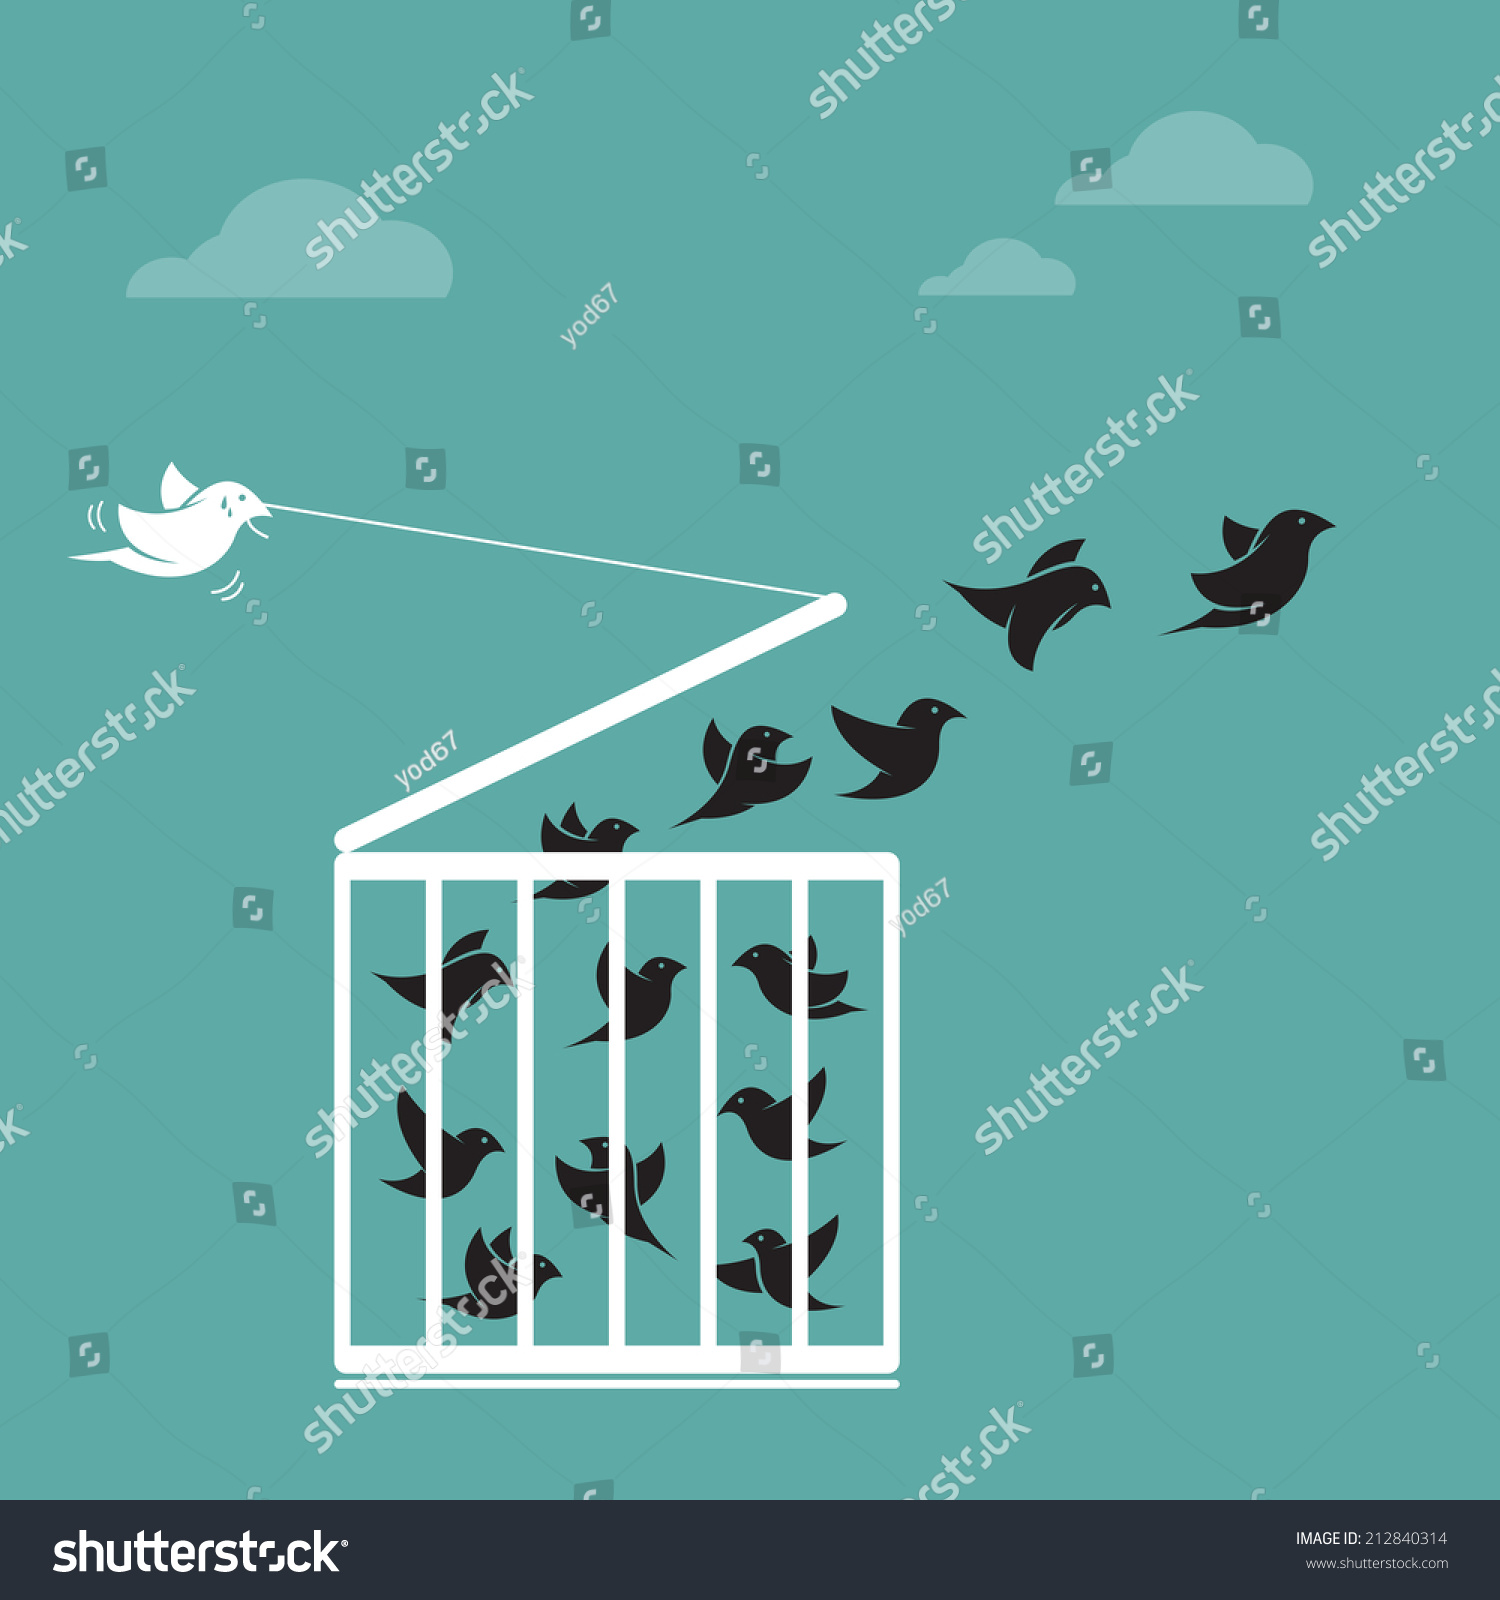 Vector Image Of A Bird In The Cage And Outside The Cage. Freedom ...